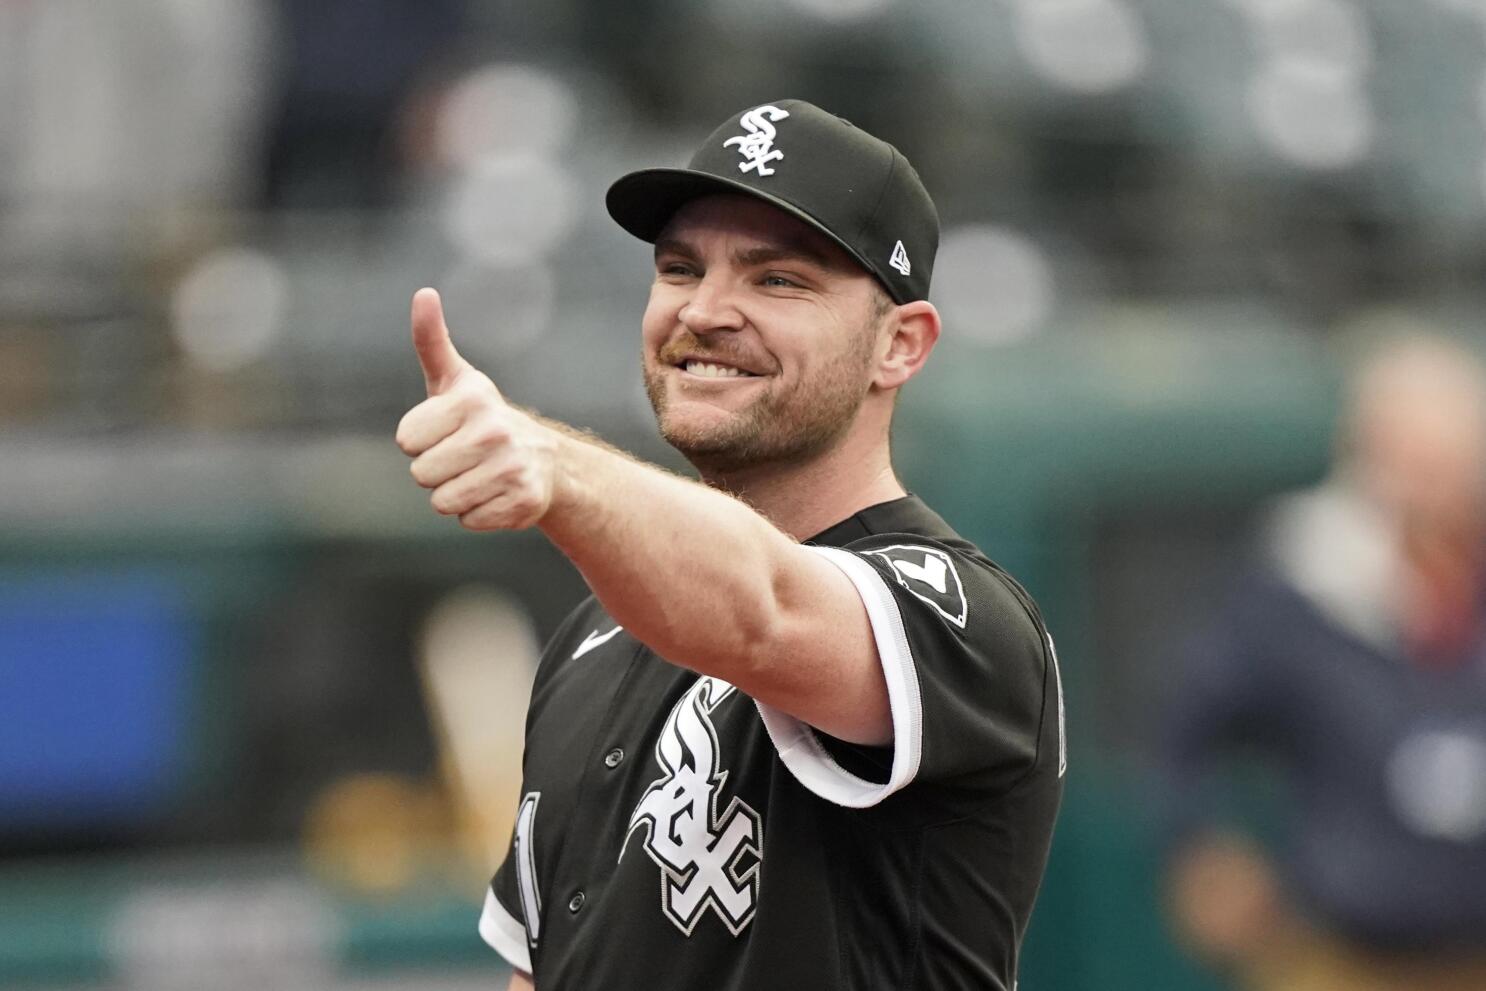 Chicago White Sox: This is the perfect bullpen setup for 2021